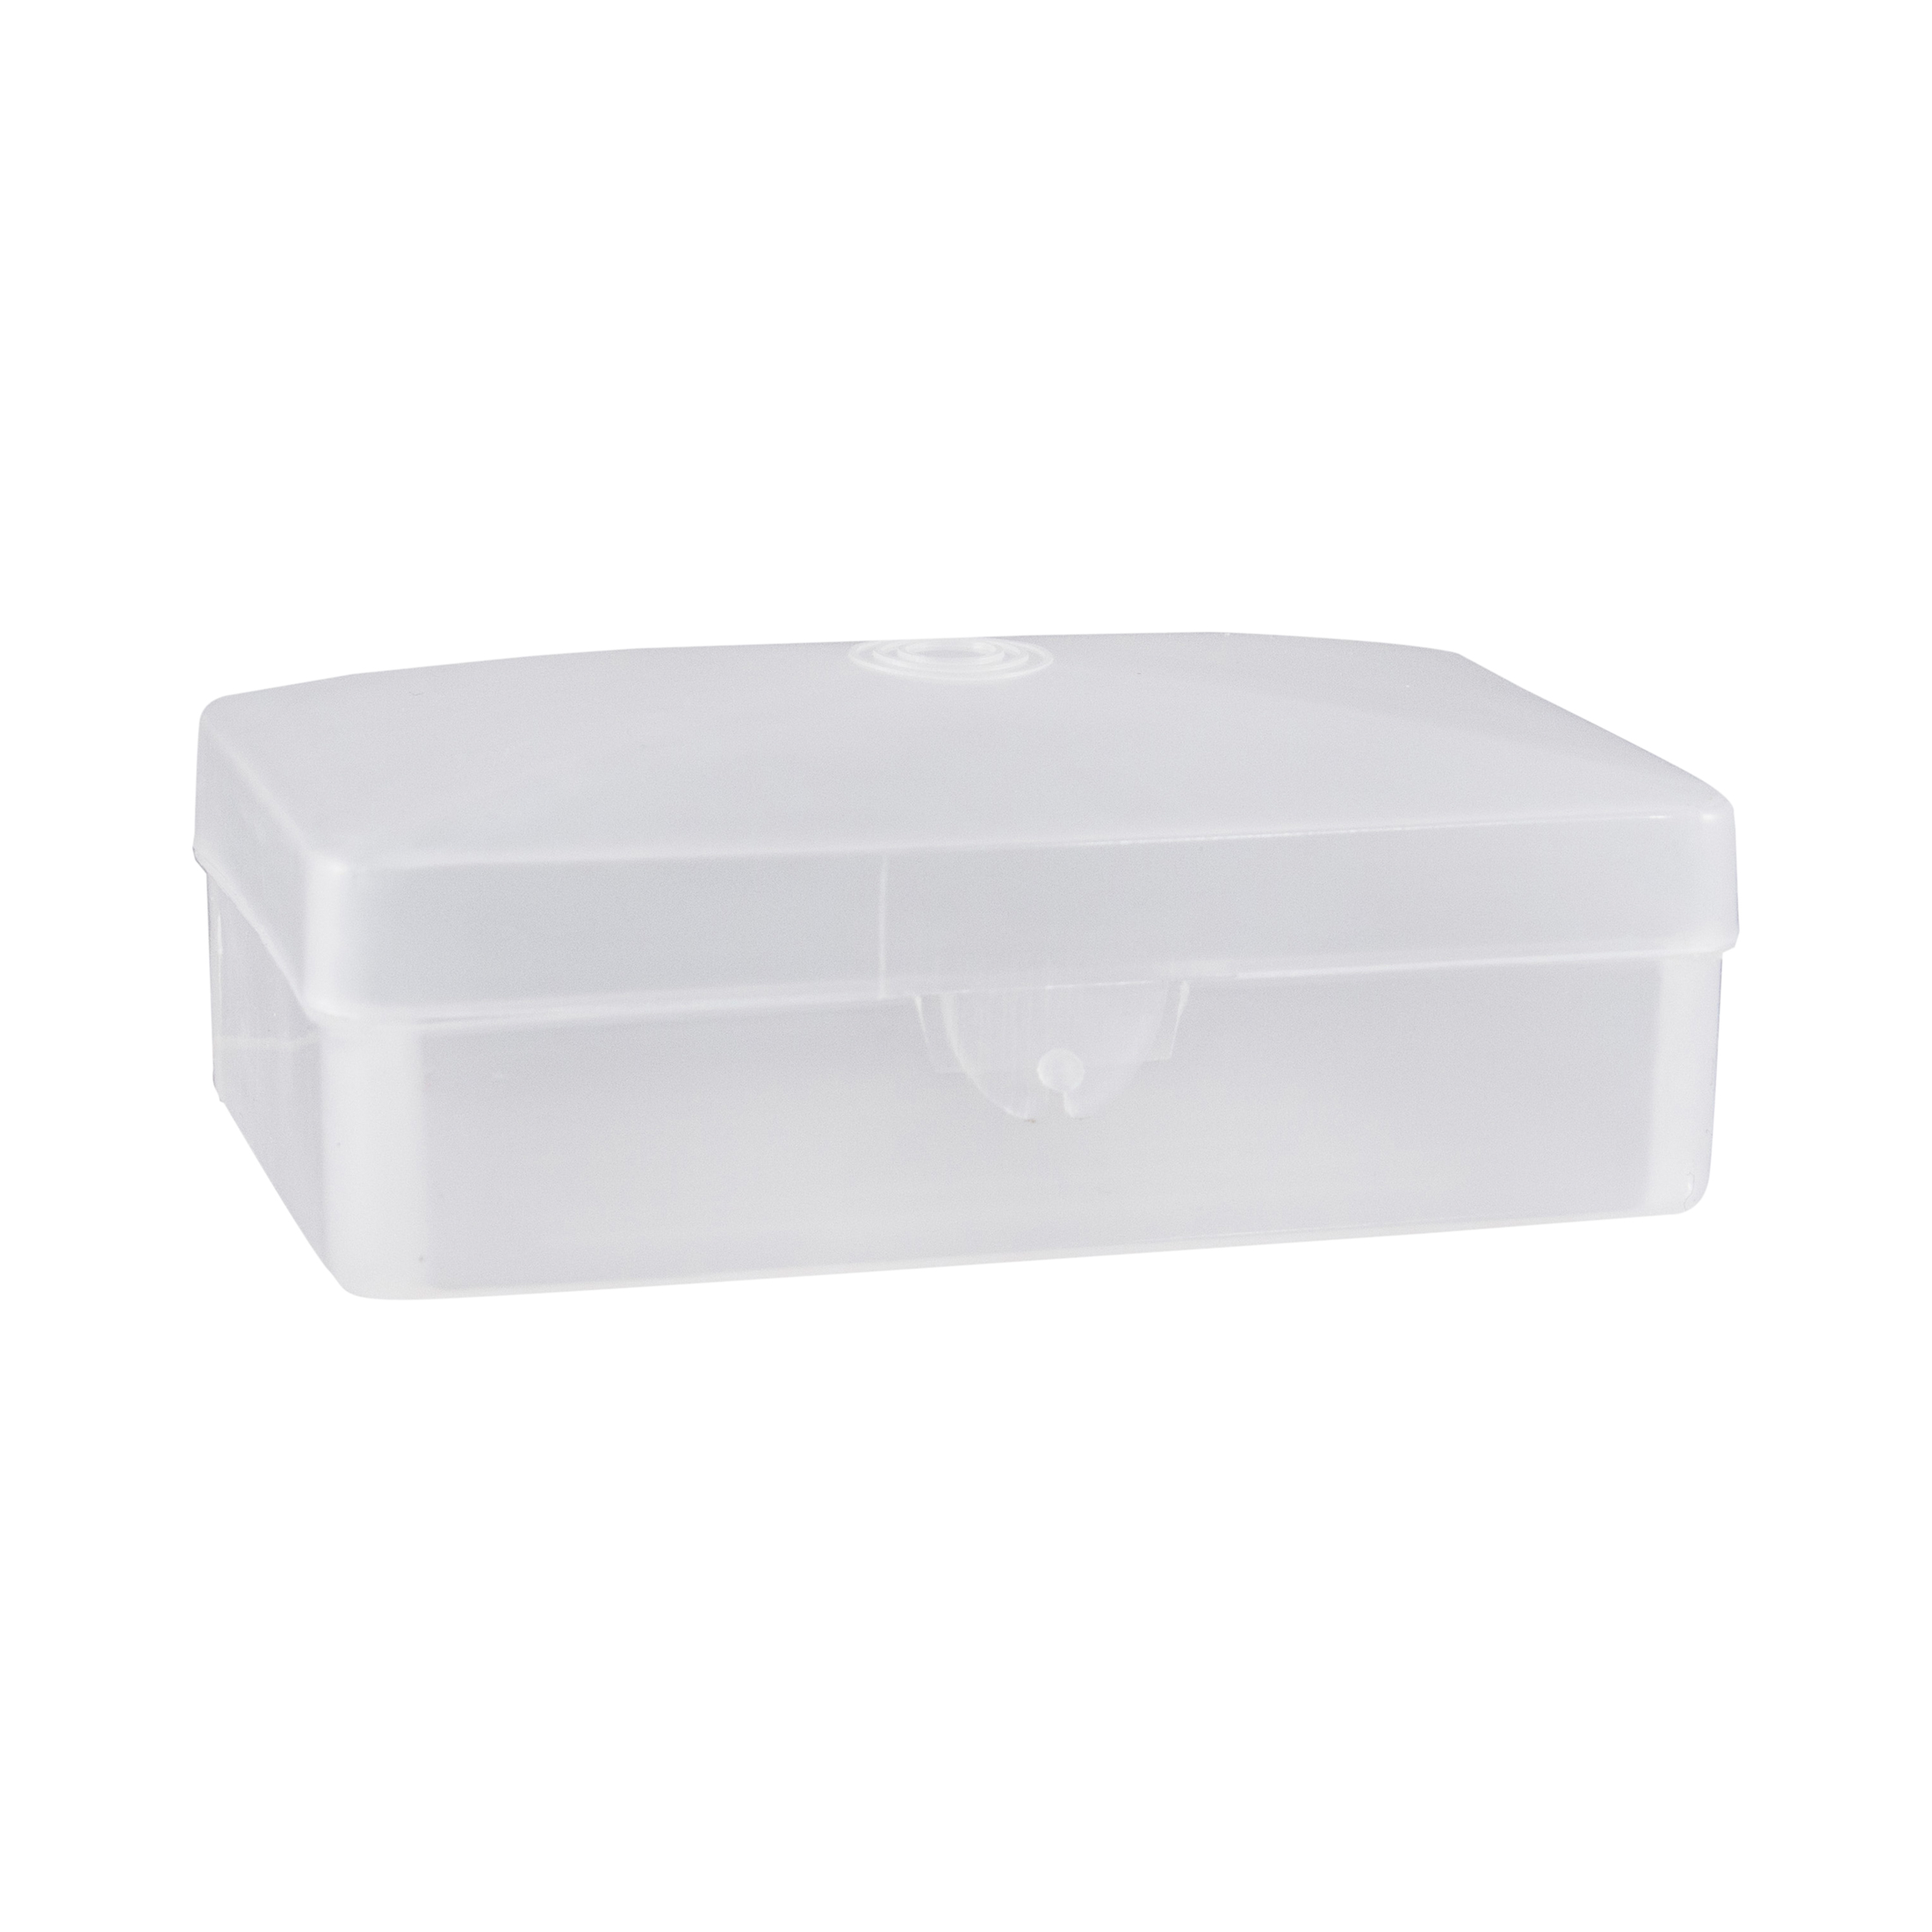 Dawn Mist Soap Box, Clear, plastic w/hinged lid, holds up to #5 bar $35.80/Case of 100 Dukal SB01C